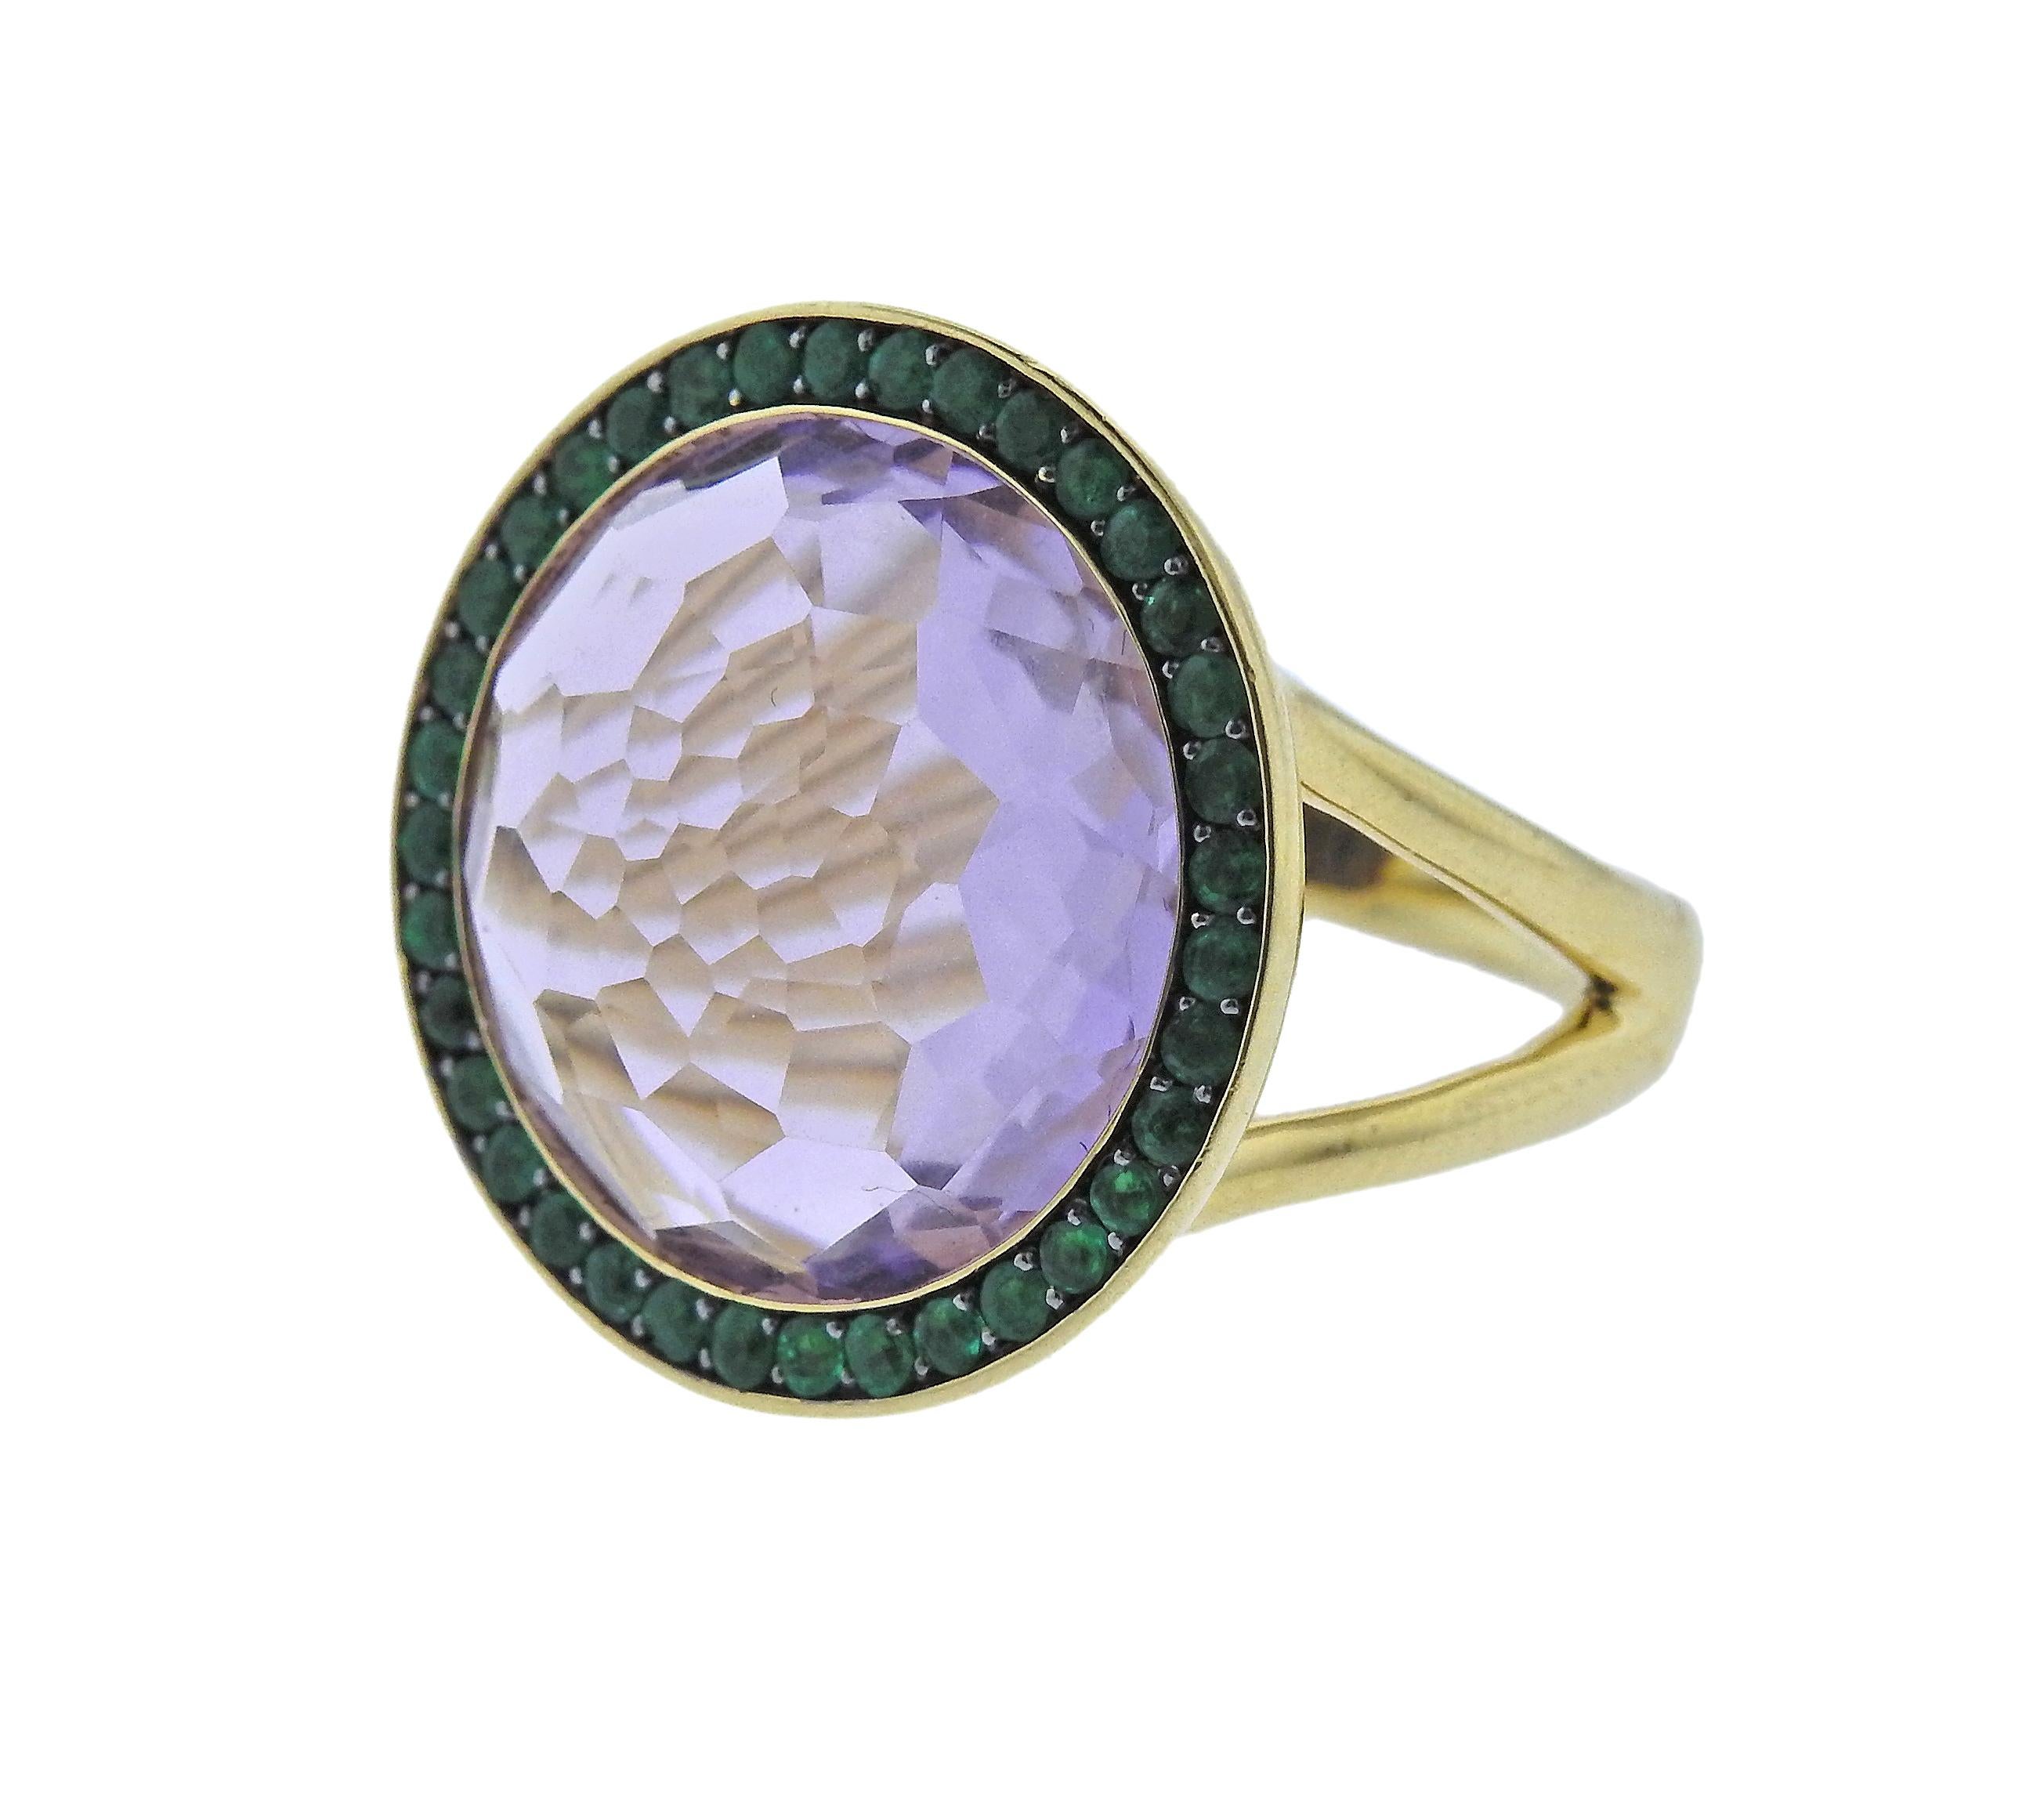 18k gold cocktail ring by Ippolita, set with amethyst, surrounded with emeralds. Ring size - 7 1/4, ring top - 21mm in diameter, weighs 9.6 grams. MArked Ippolita and 18k.  Retail $3195. Comes with Pouch.